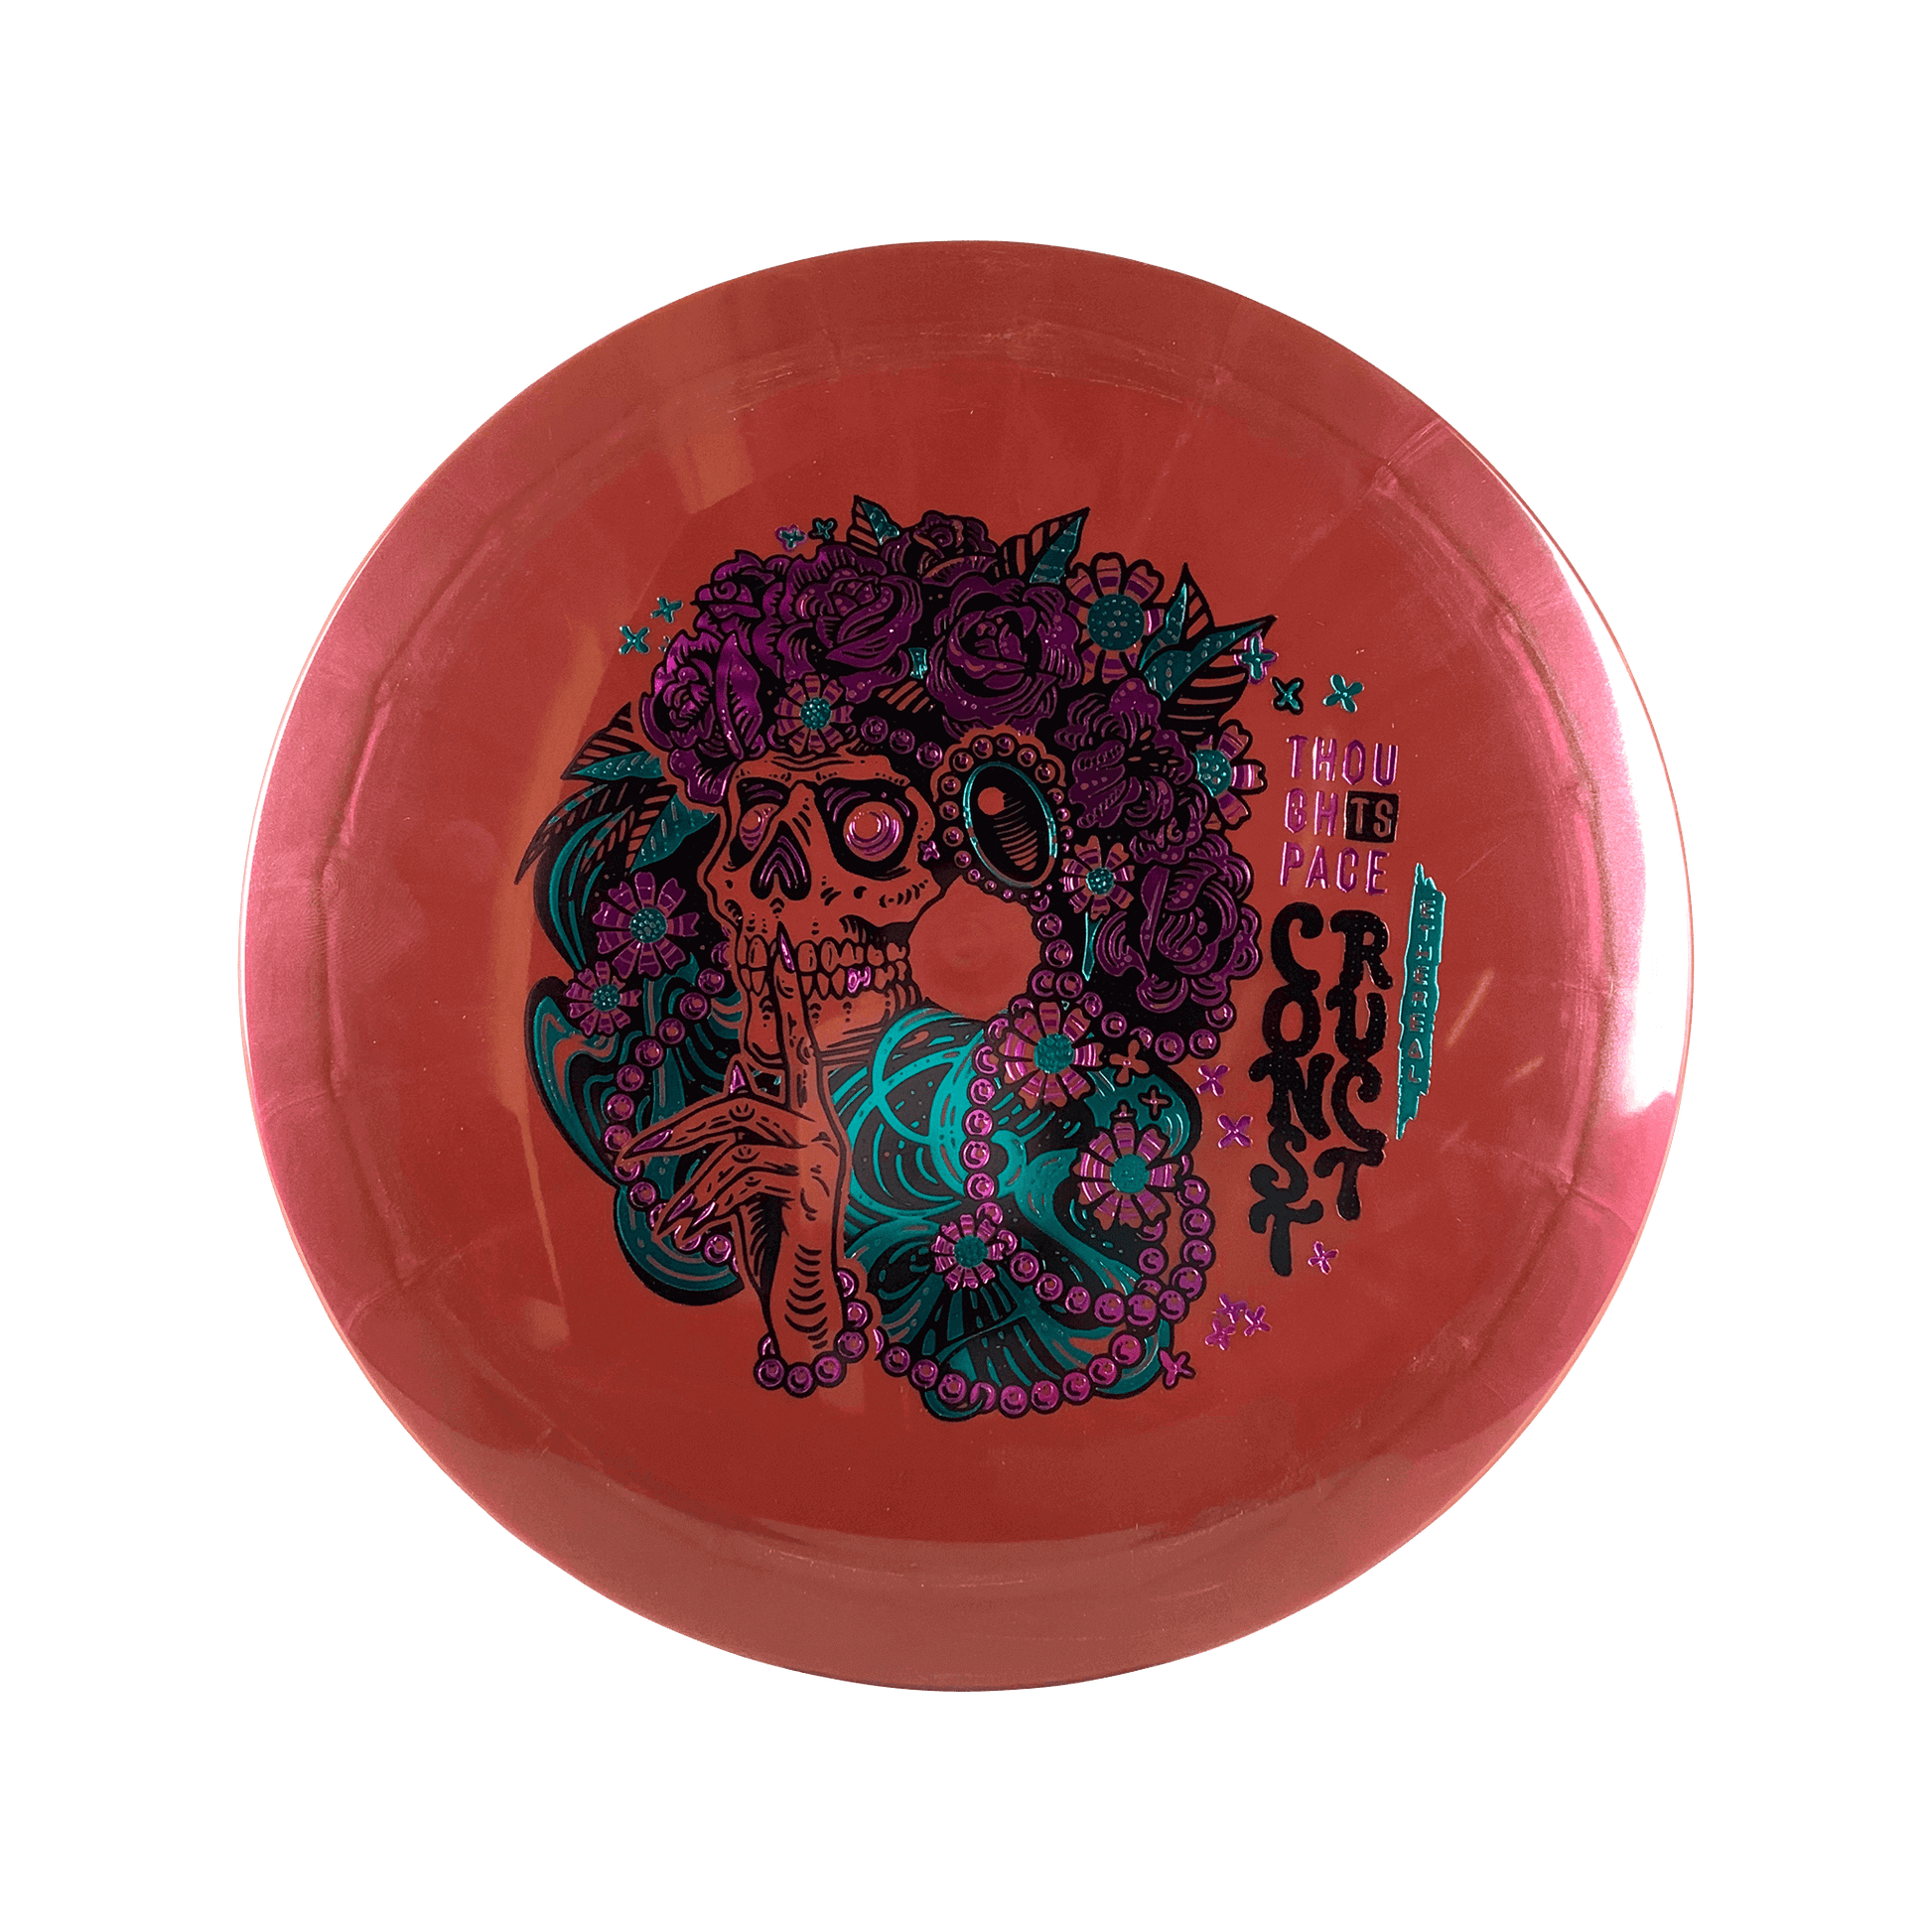 Ethereal Construct Disc Thought Space Athletics maroon 174 